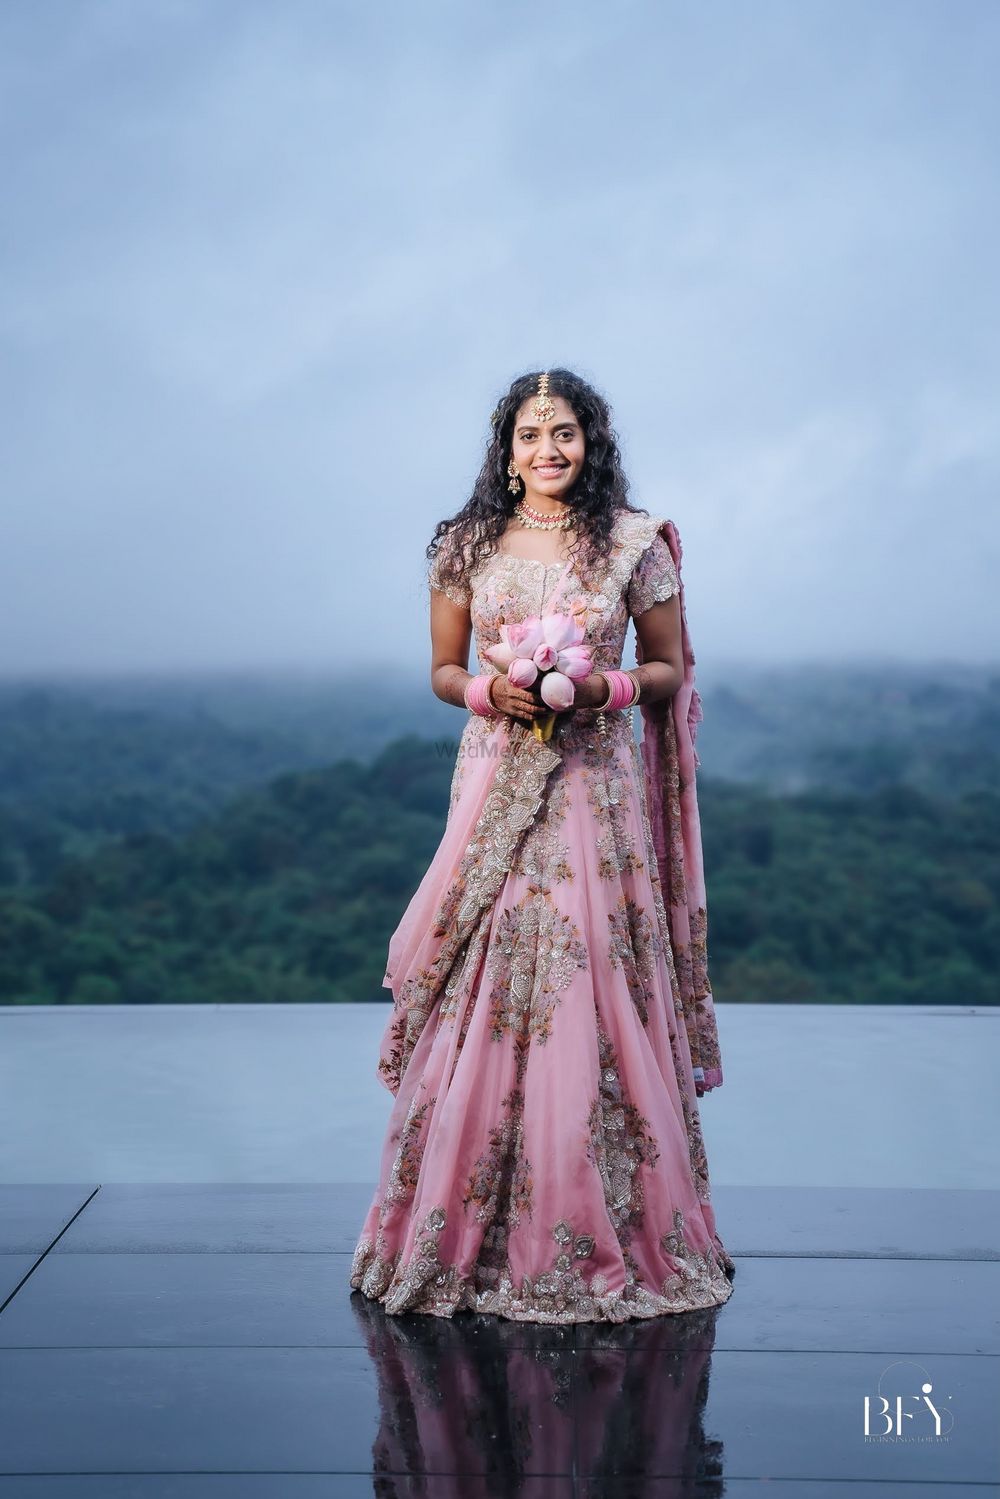 Photo of pink and gold bridal lehenga with bouquet of lotus